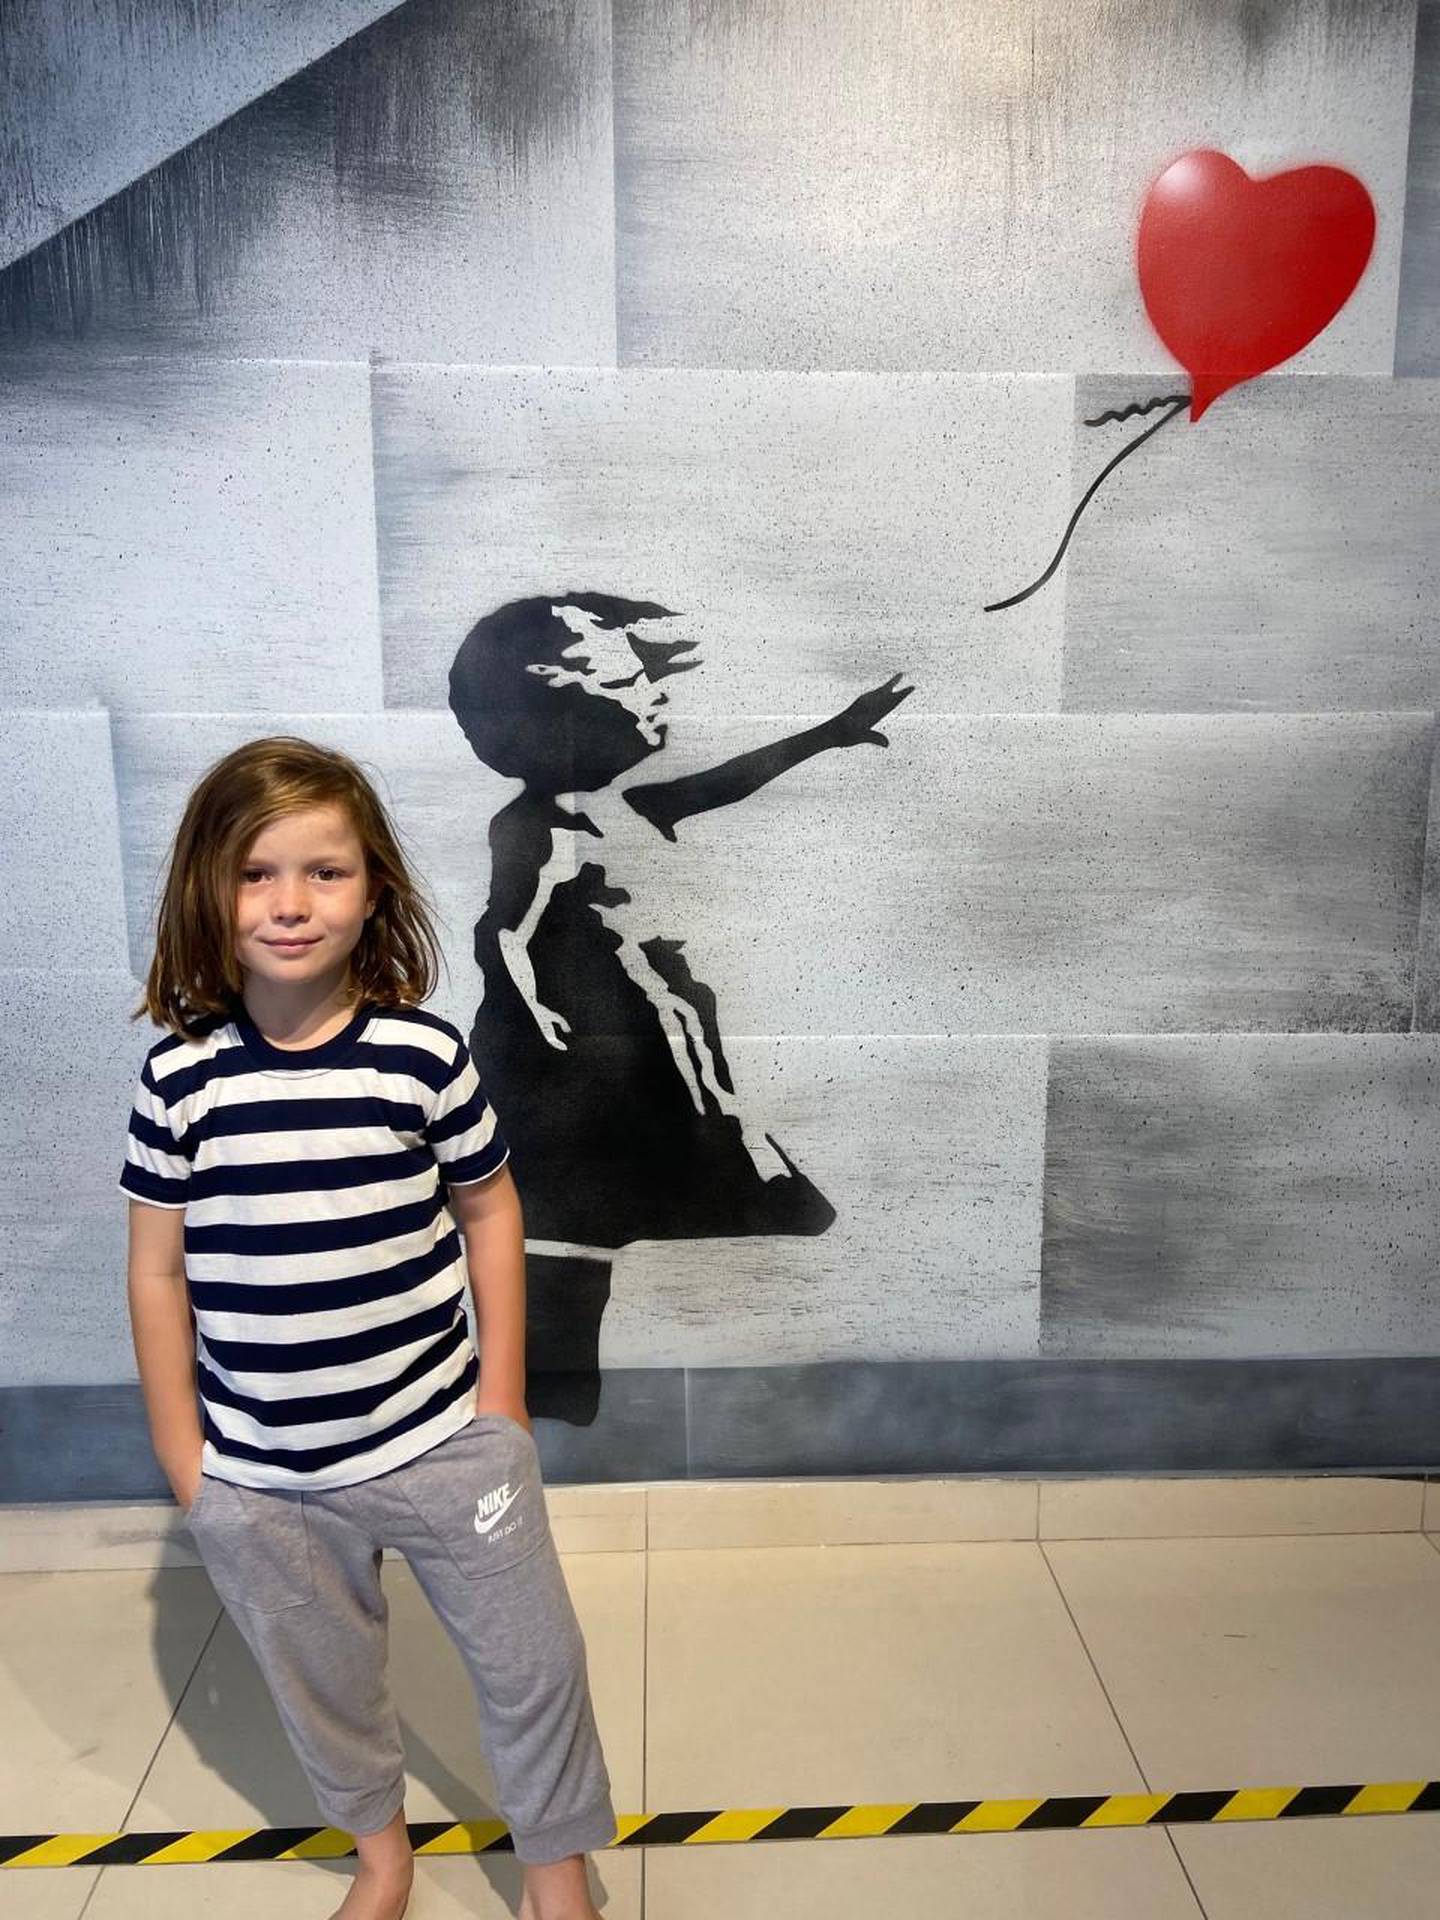 Indiana, 8, beside one of Banksy's most recognisable images: 'Girl With Balloon'. Courtesy Gemma White